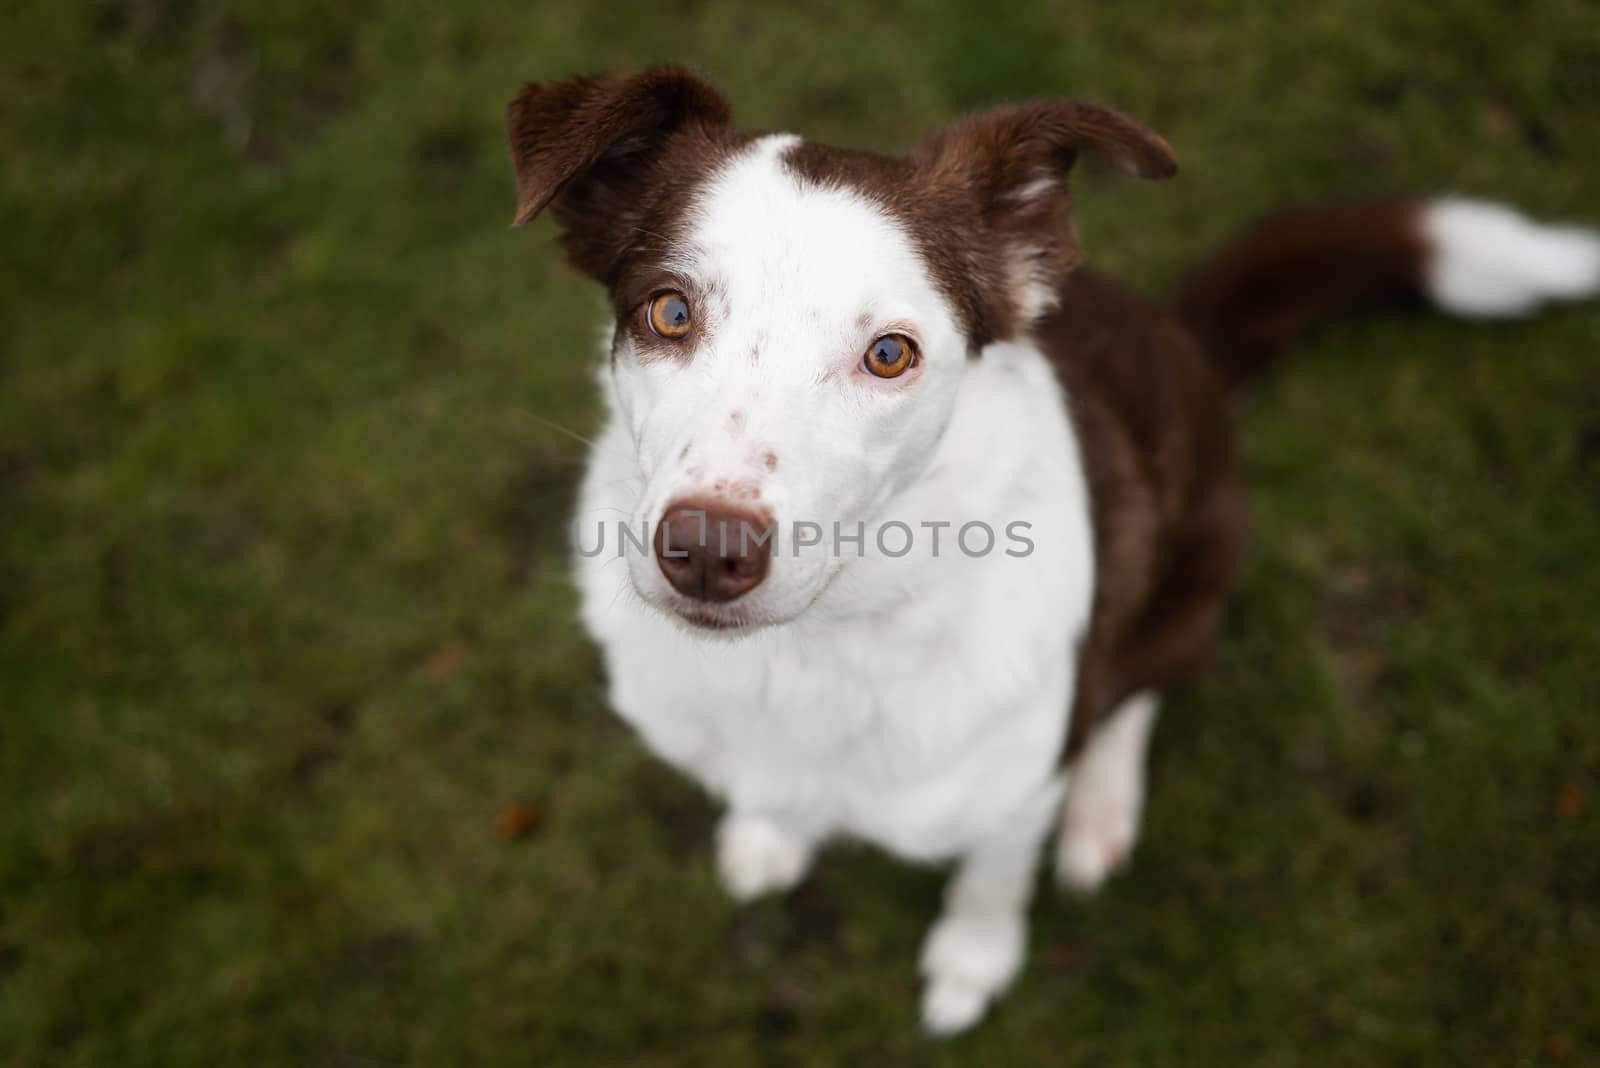 Cute pet border collie dog soft outdoor portrait with focus on eyes by Pendleton